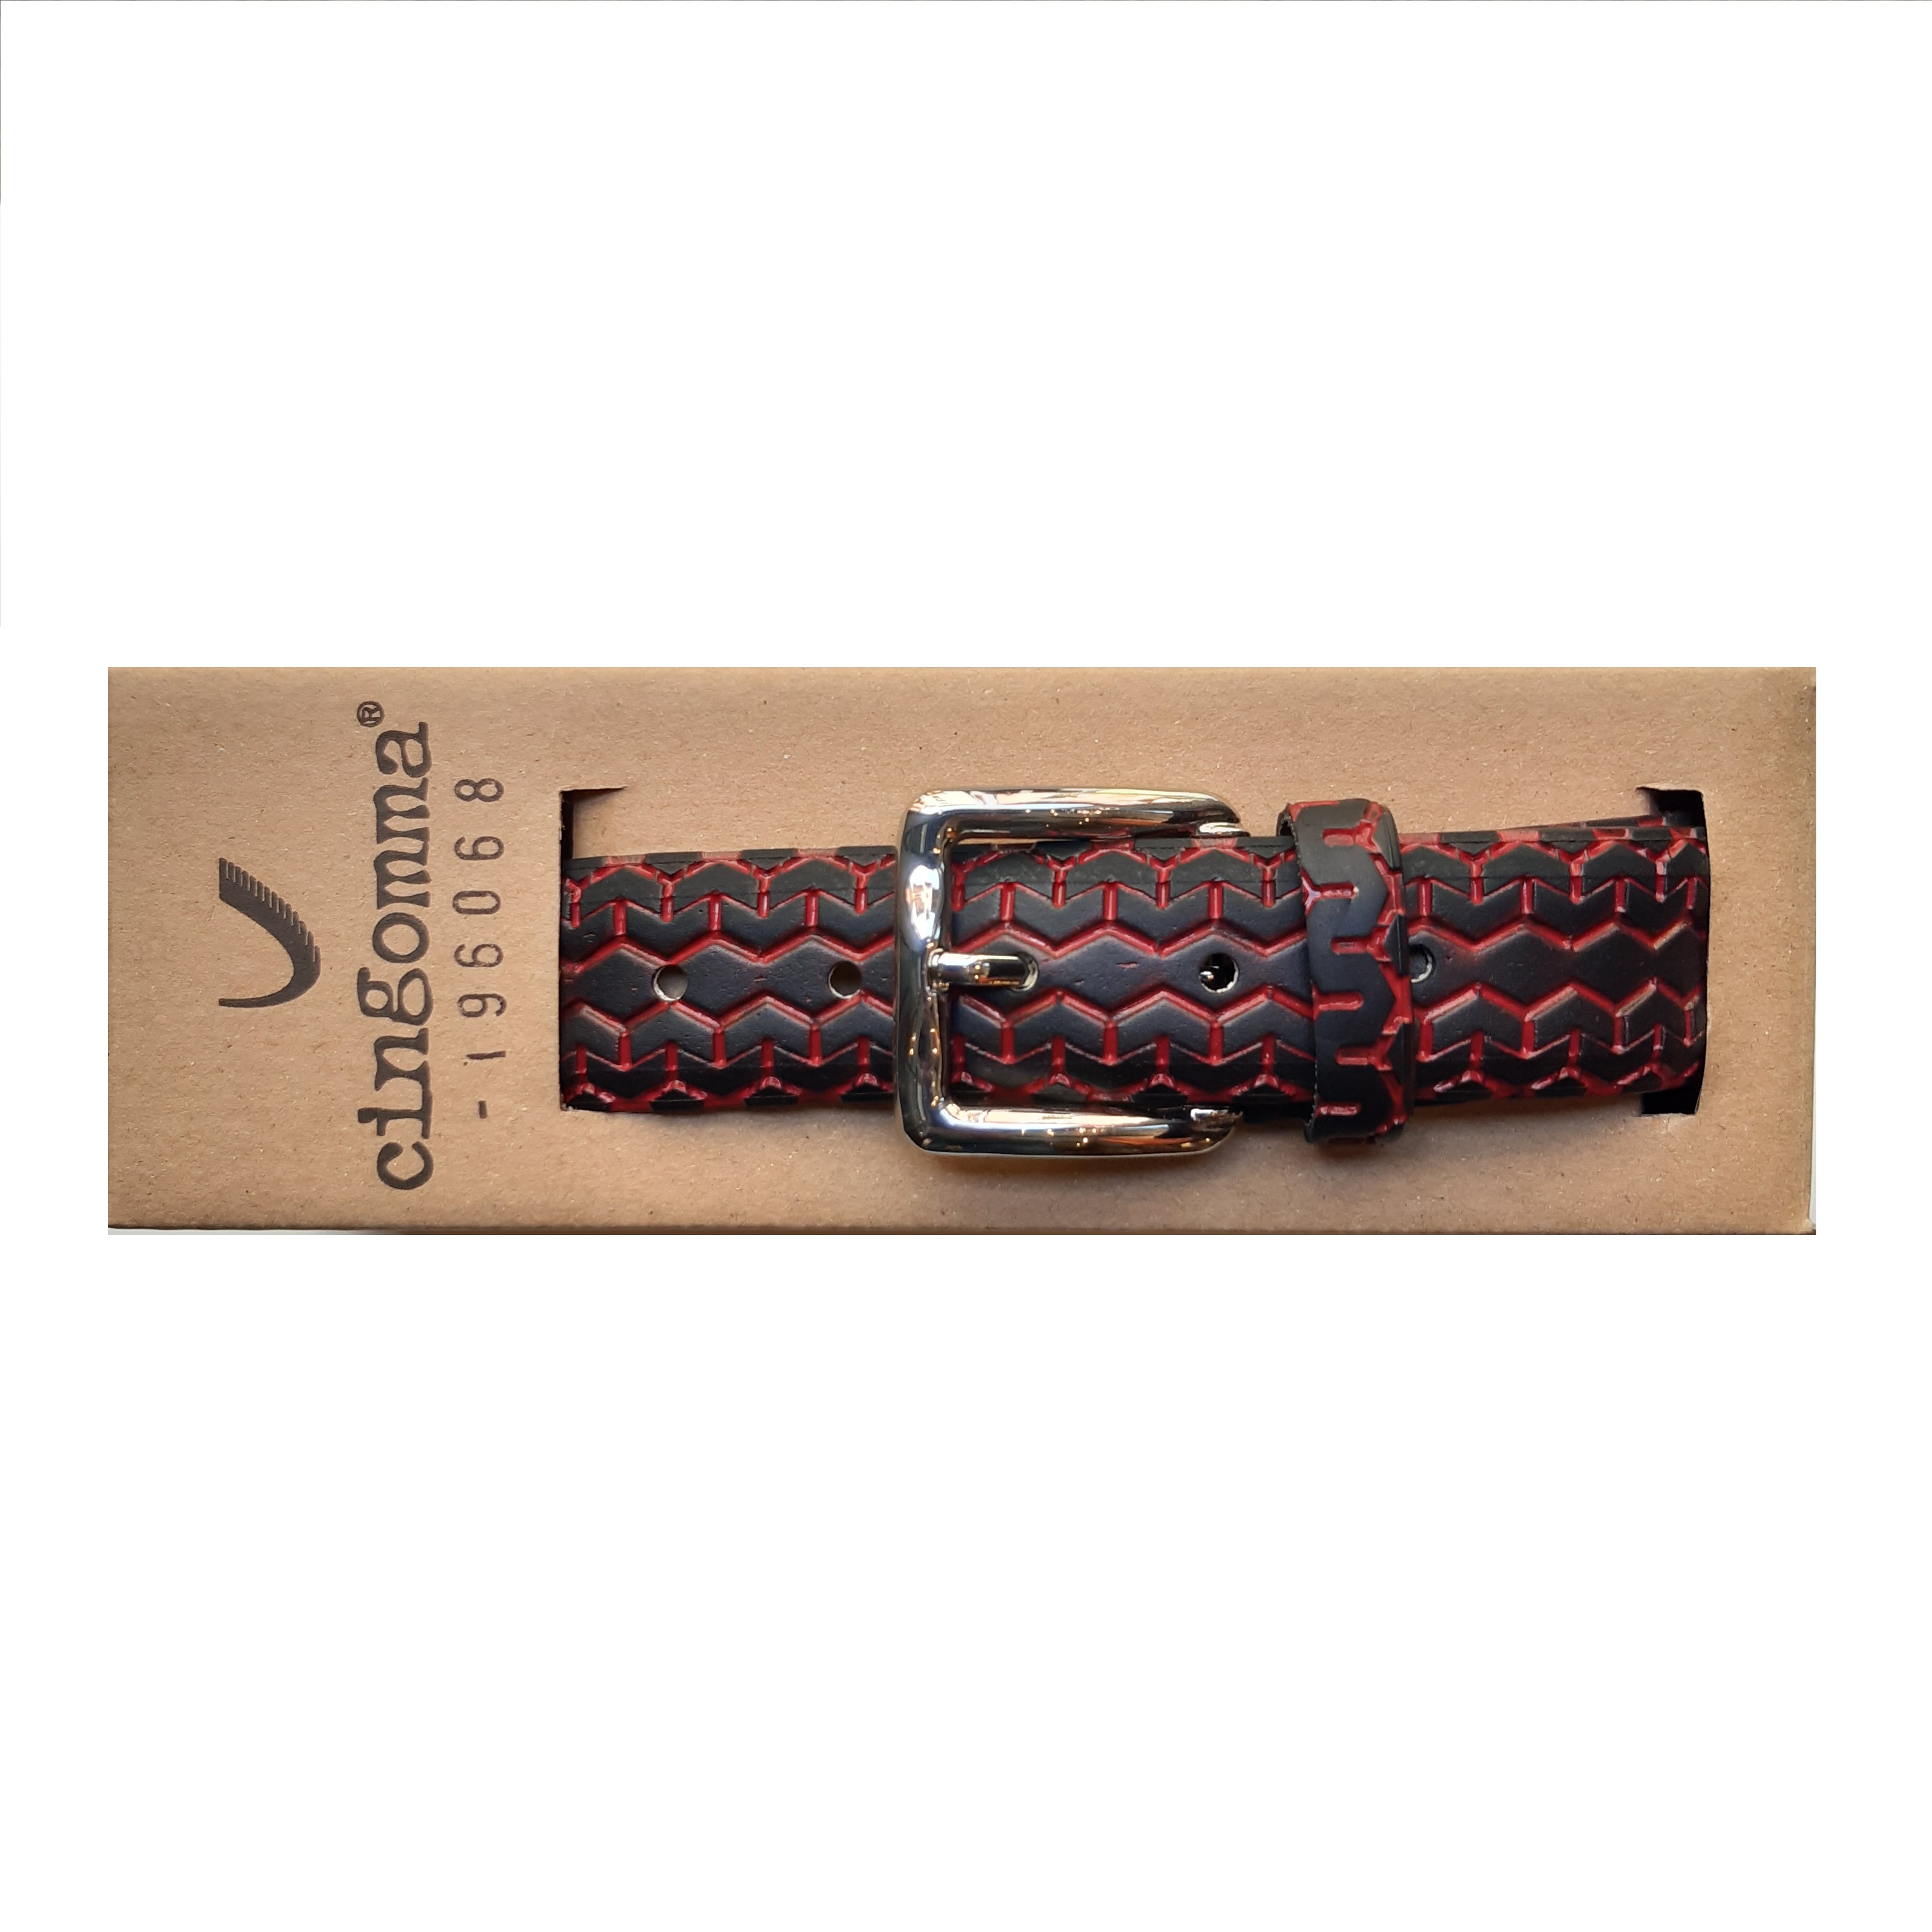 Cingomma Recycled Belt Bicycle Tyre - Nº196068